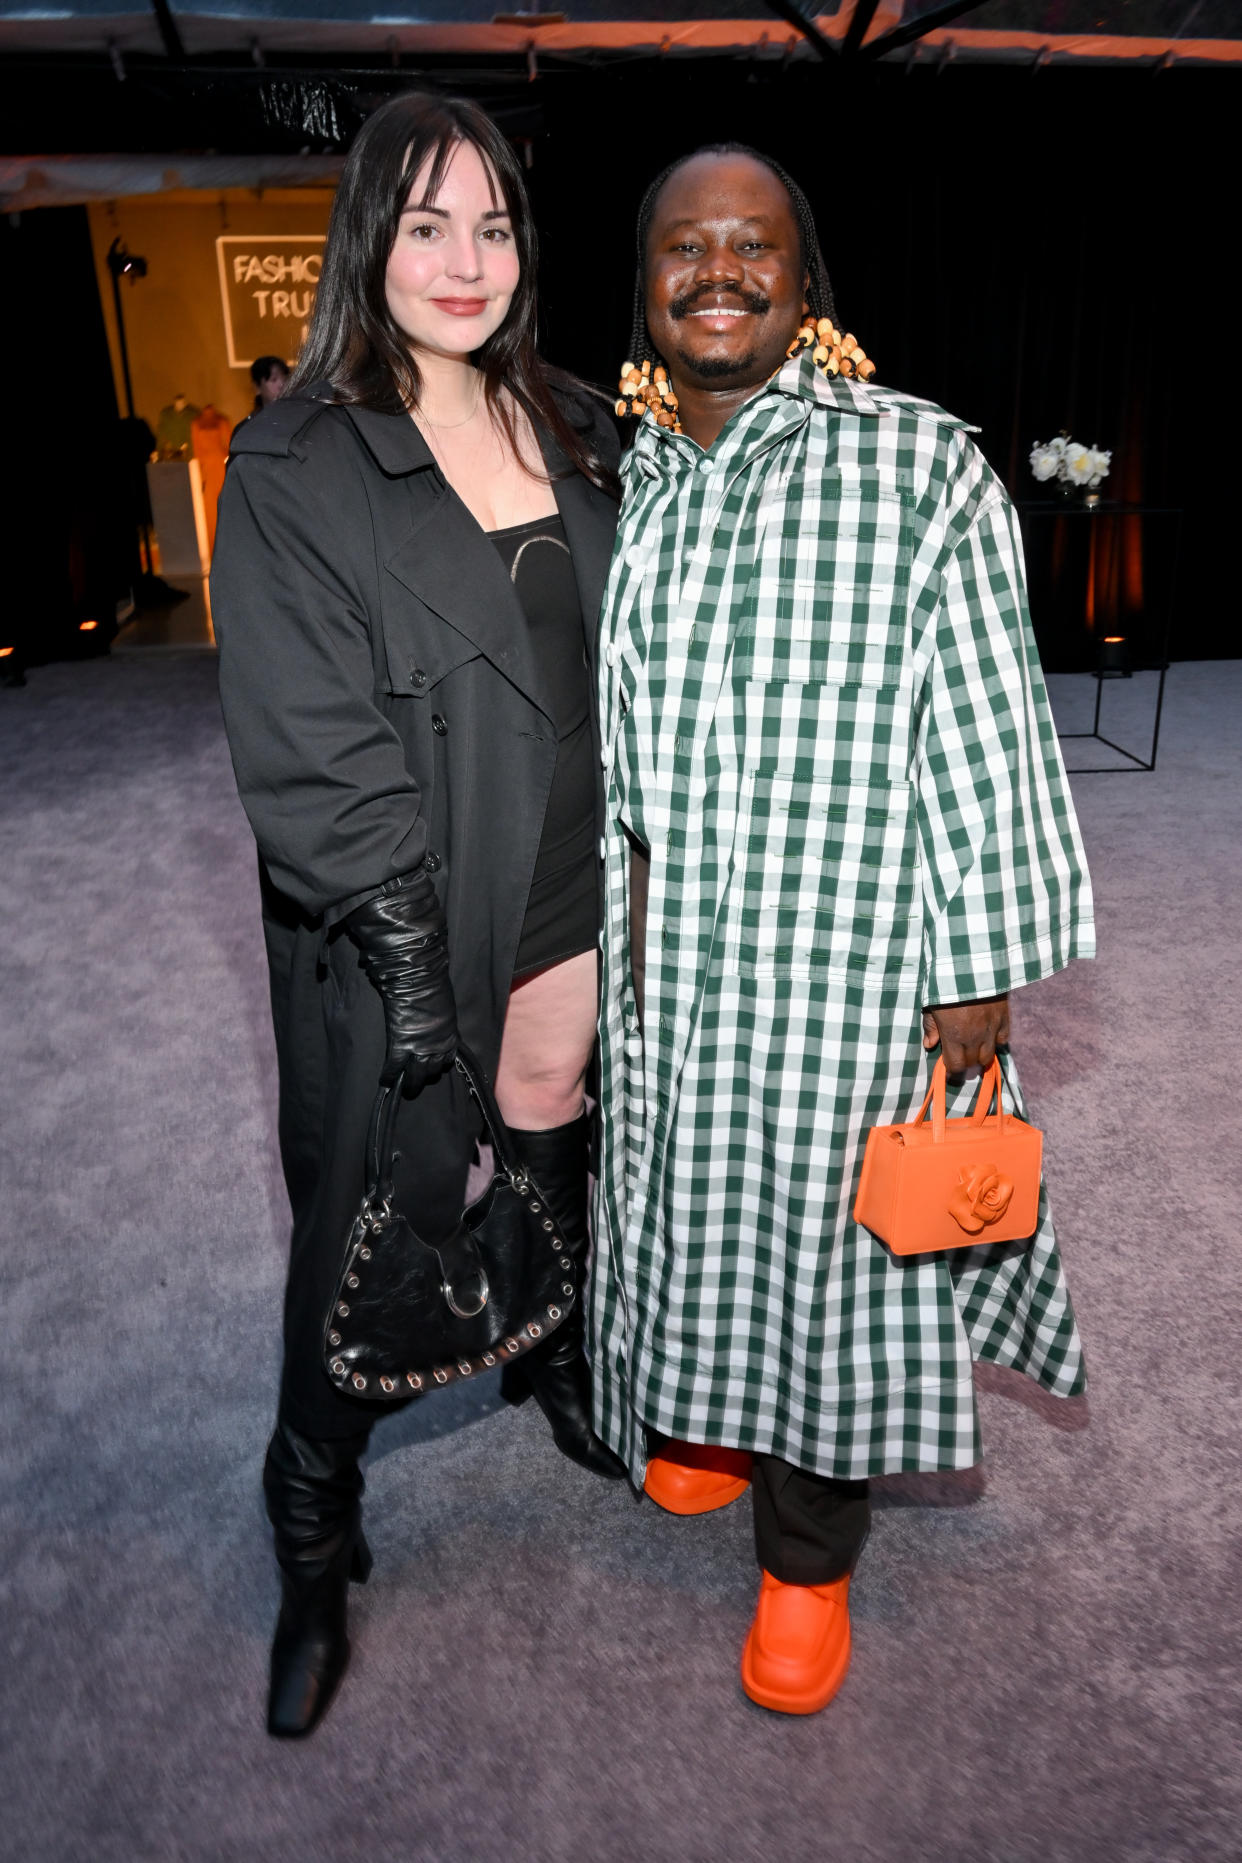 Elena Velez and Jacques Agbobly at the Fashion Trust U.S. Awards held at Goya Studios on March 21, 2023 in Los Angeles, California.